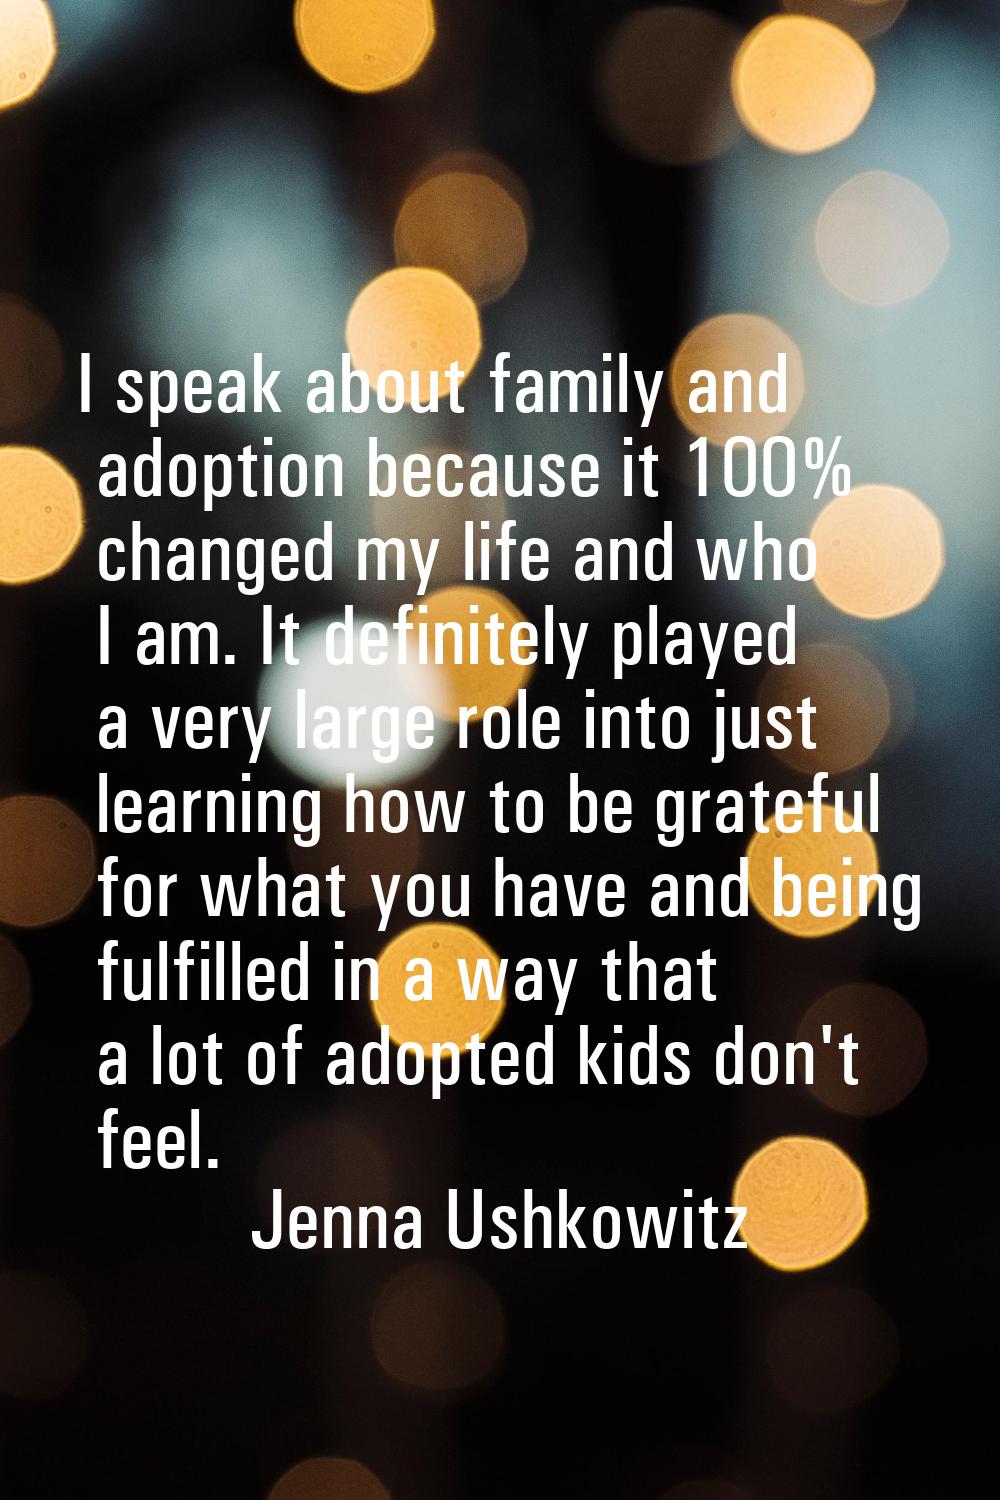 I speak about family and adoption because it 100% changed my life and who I am. It definitely playe